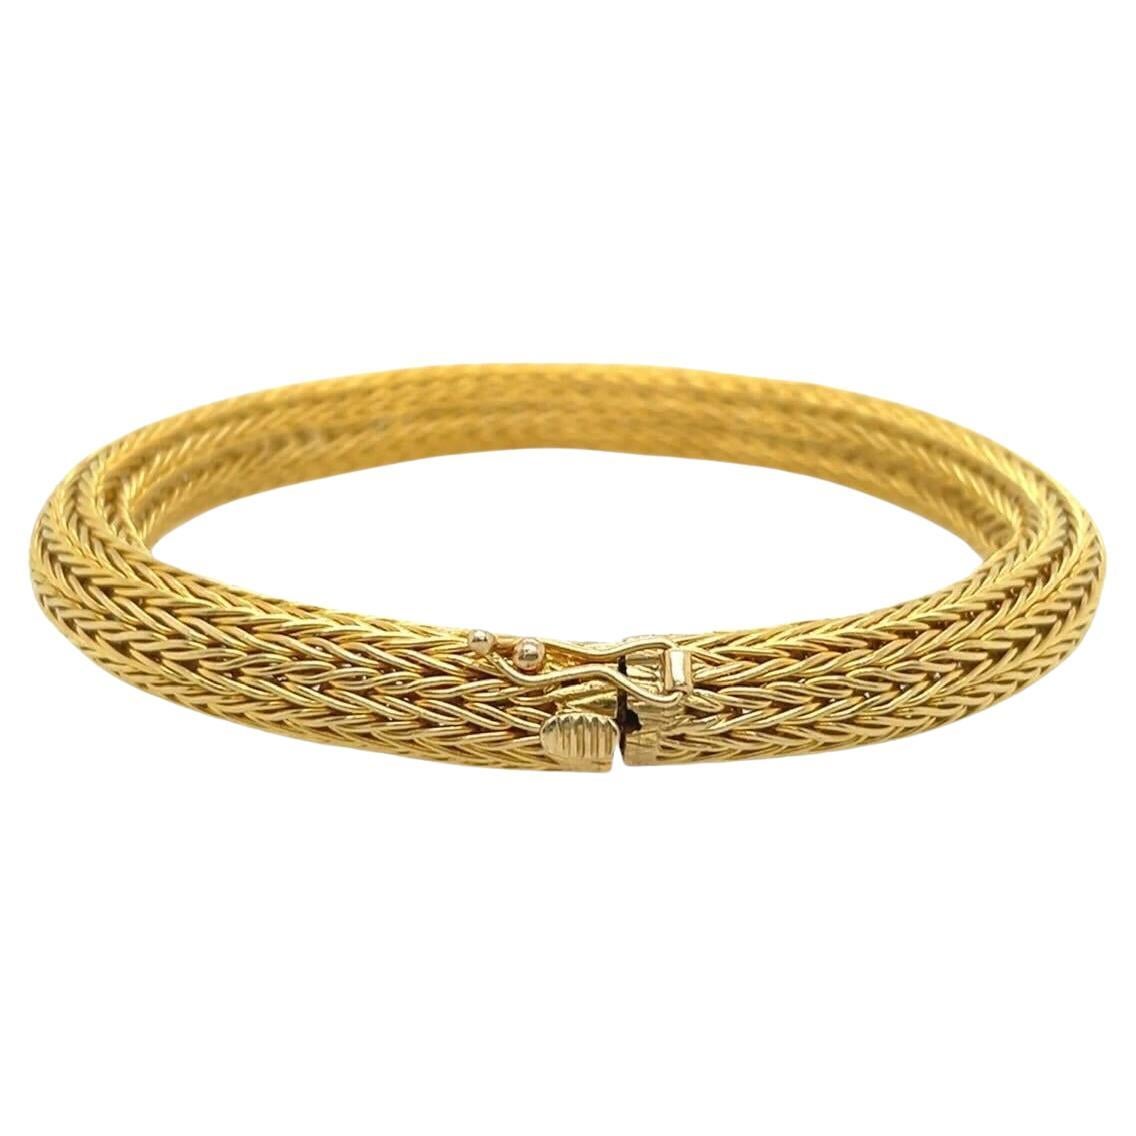 An 18 karat yellow gold bracelet, Ilias Lalaounis.  Designed as a cylindrical length of flexible mesh formed of wheat chains.  Length approximately 7 1/2 inches.  Gross weight approximately 37.70 grams.  Signed Ilias Lalaounis. 

 